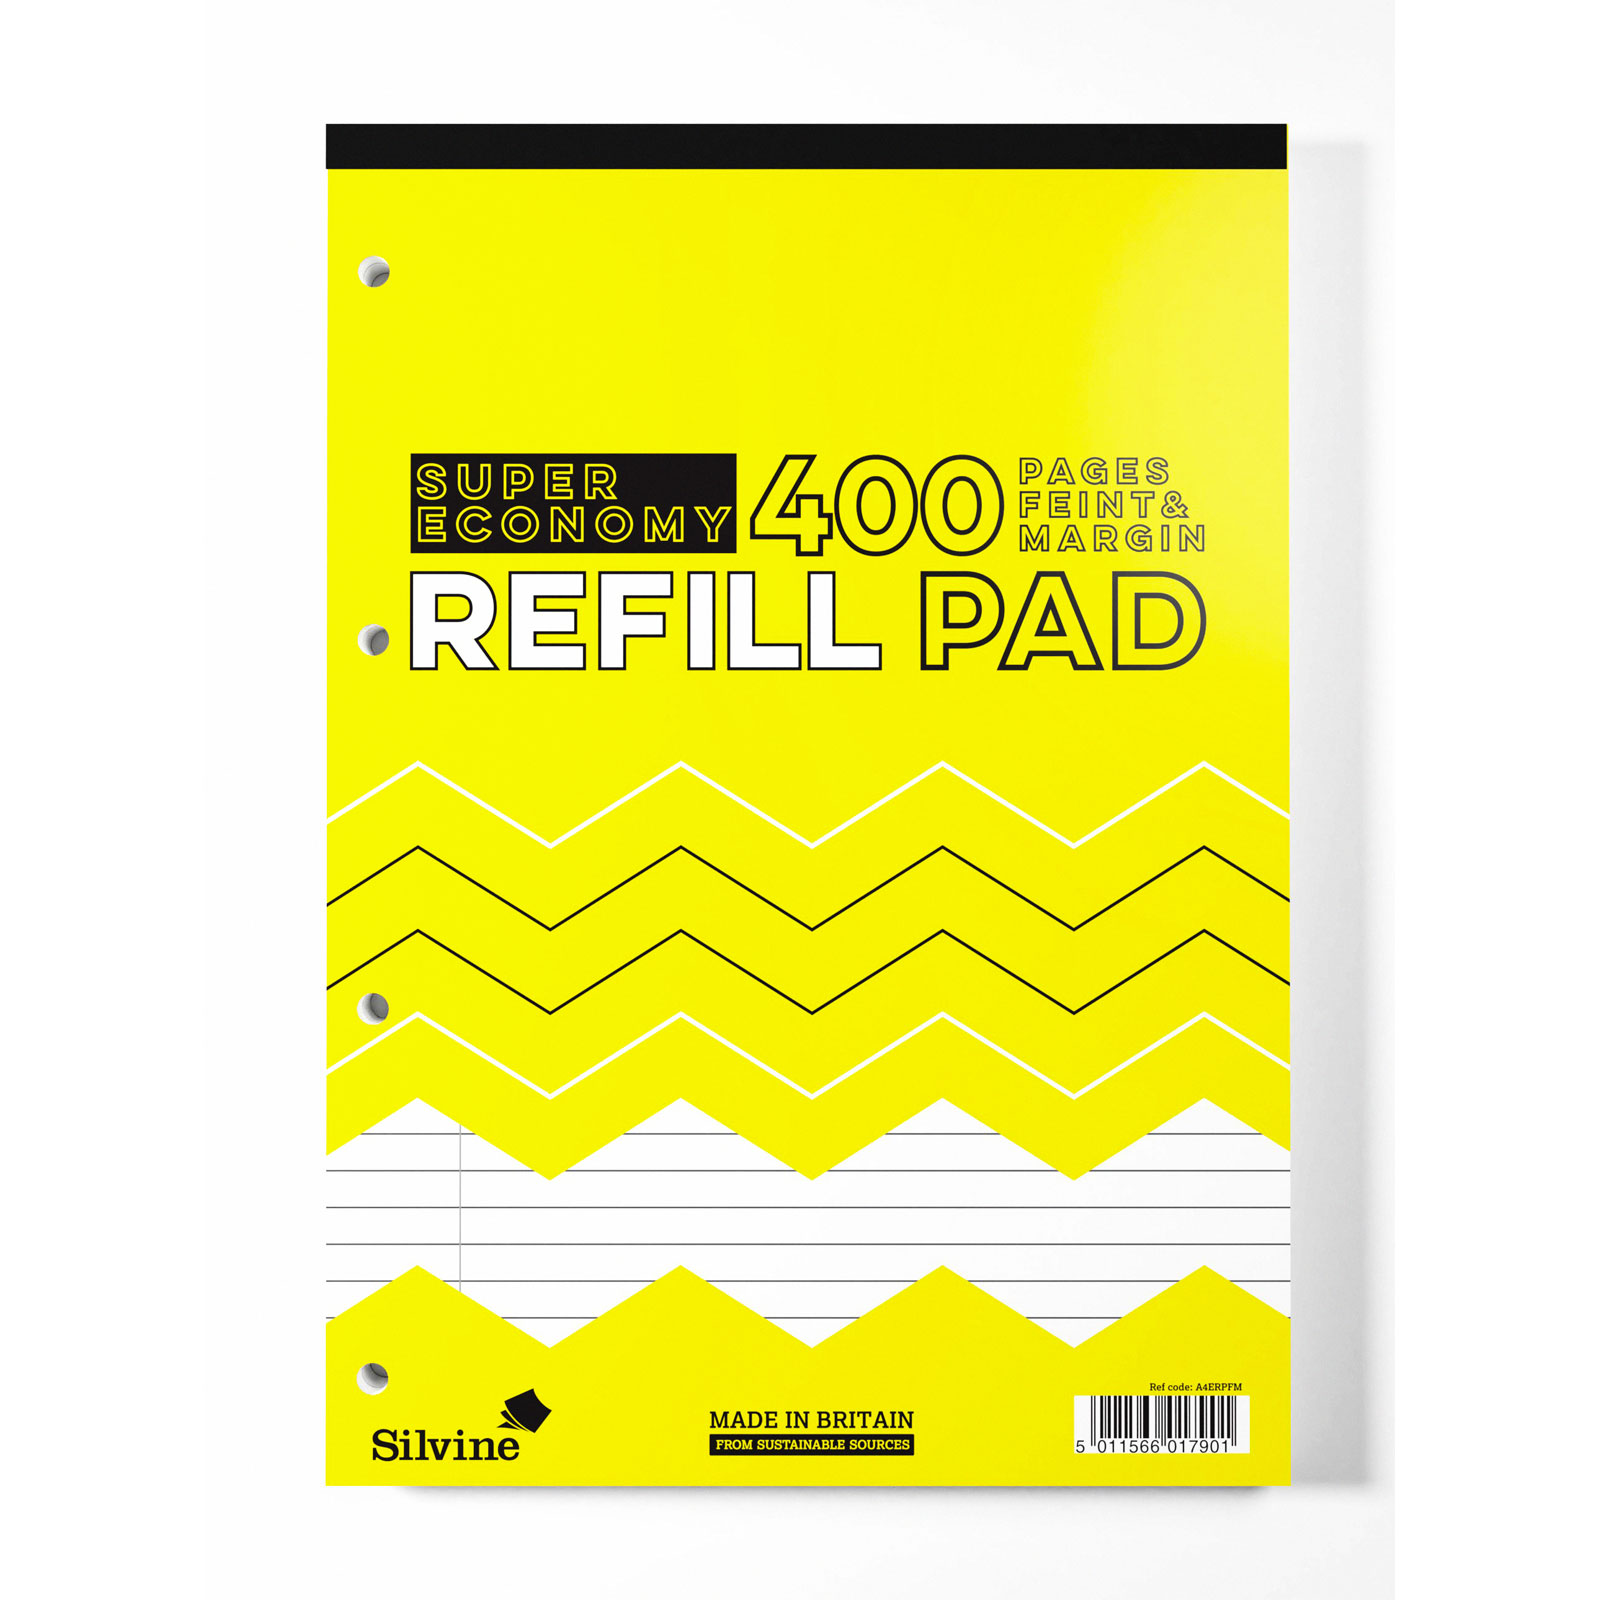 A4 Refill Pad, Super Economy, Silvine 400 pages, Feint & Margin (Yellow cover)